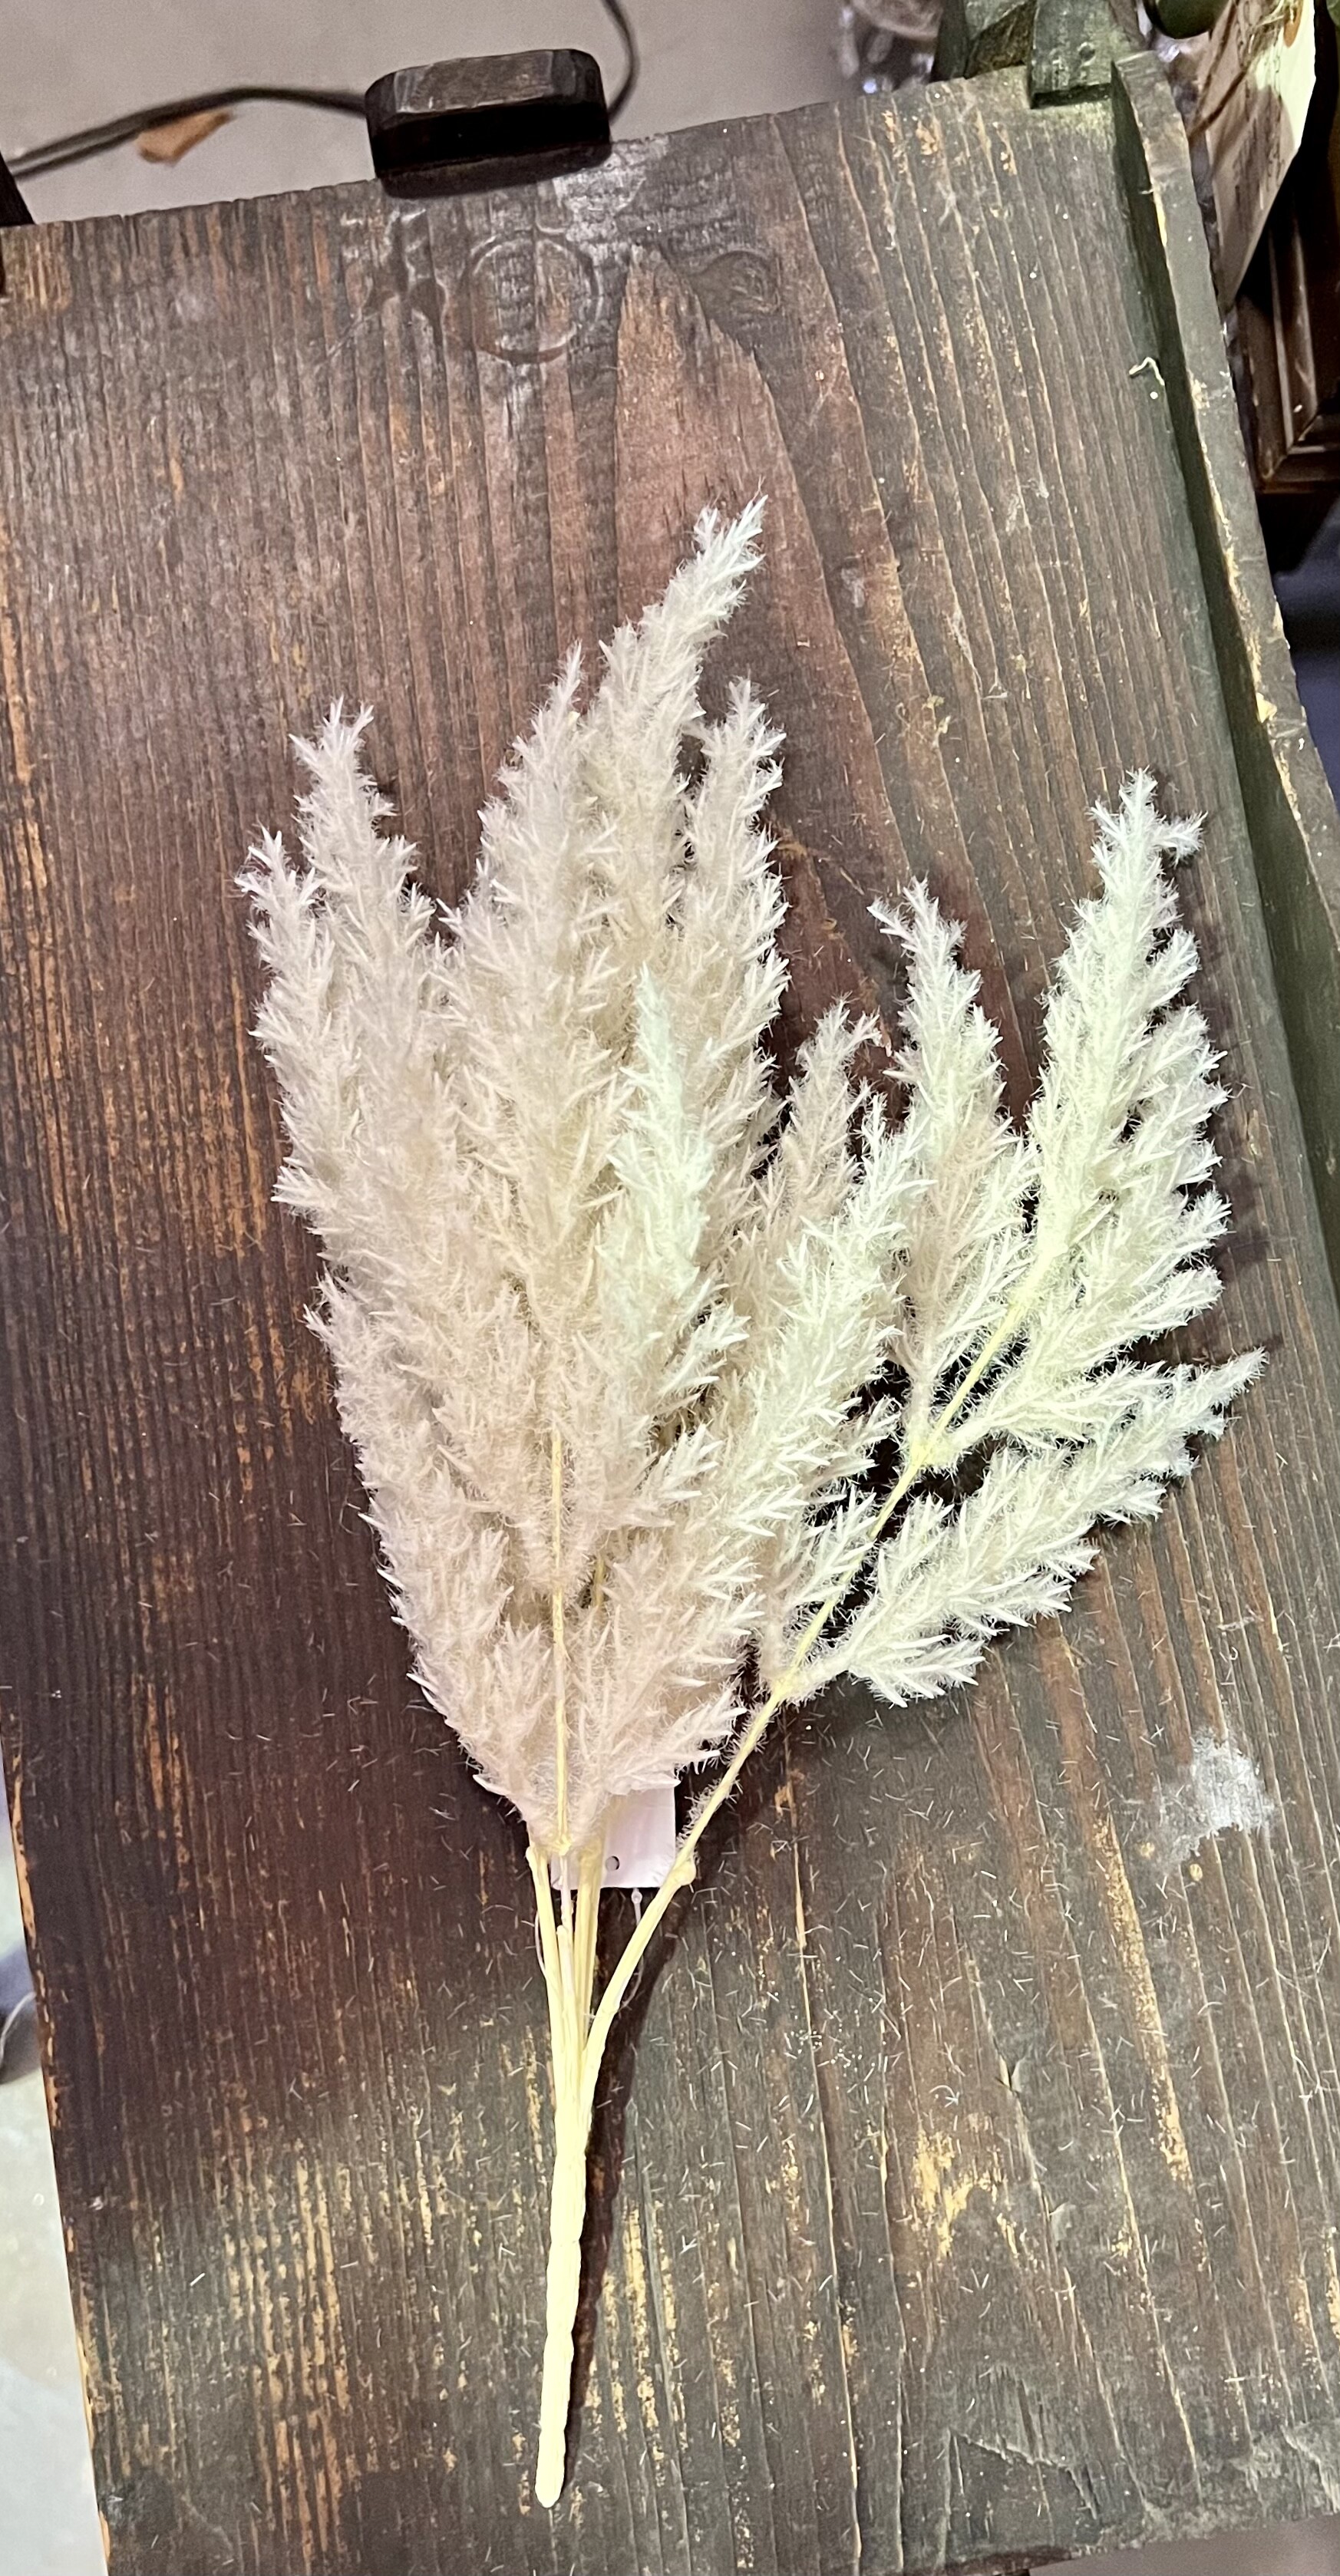 Add a touch of Boho to your home with these beatiful pampas stems. They come in your choice of cream or green and would be perfect added to any vase, jar or wicker basket. These stems measure 15 inces tall and can be fluffed for a fuller look